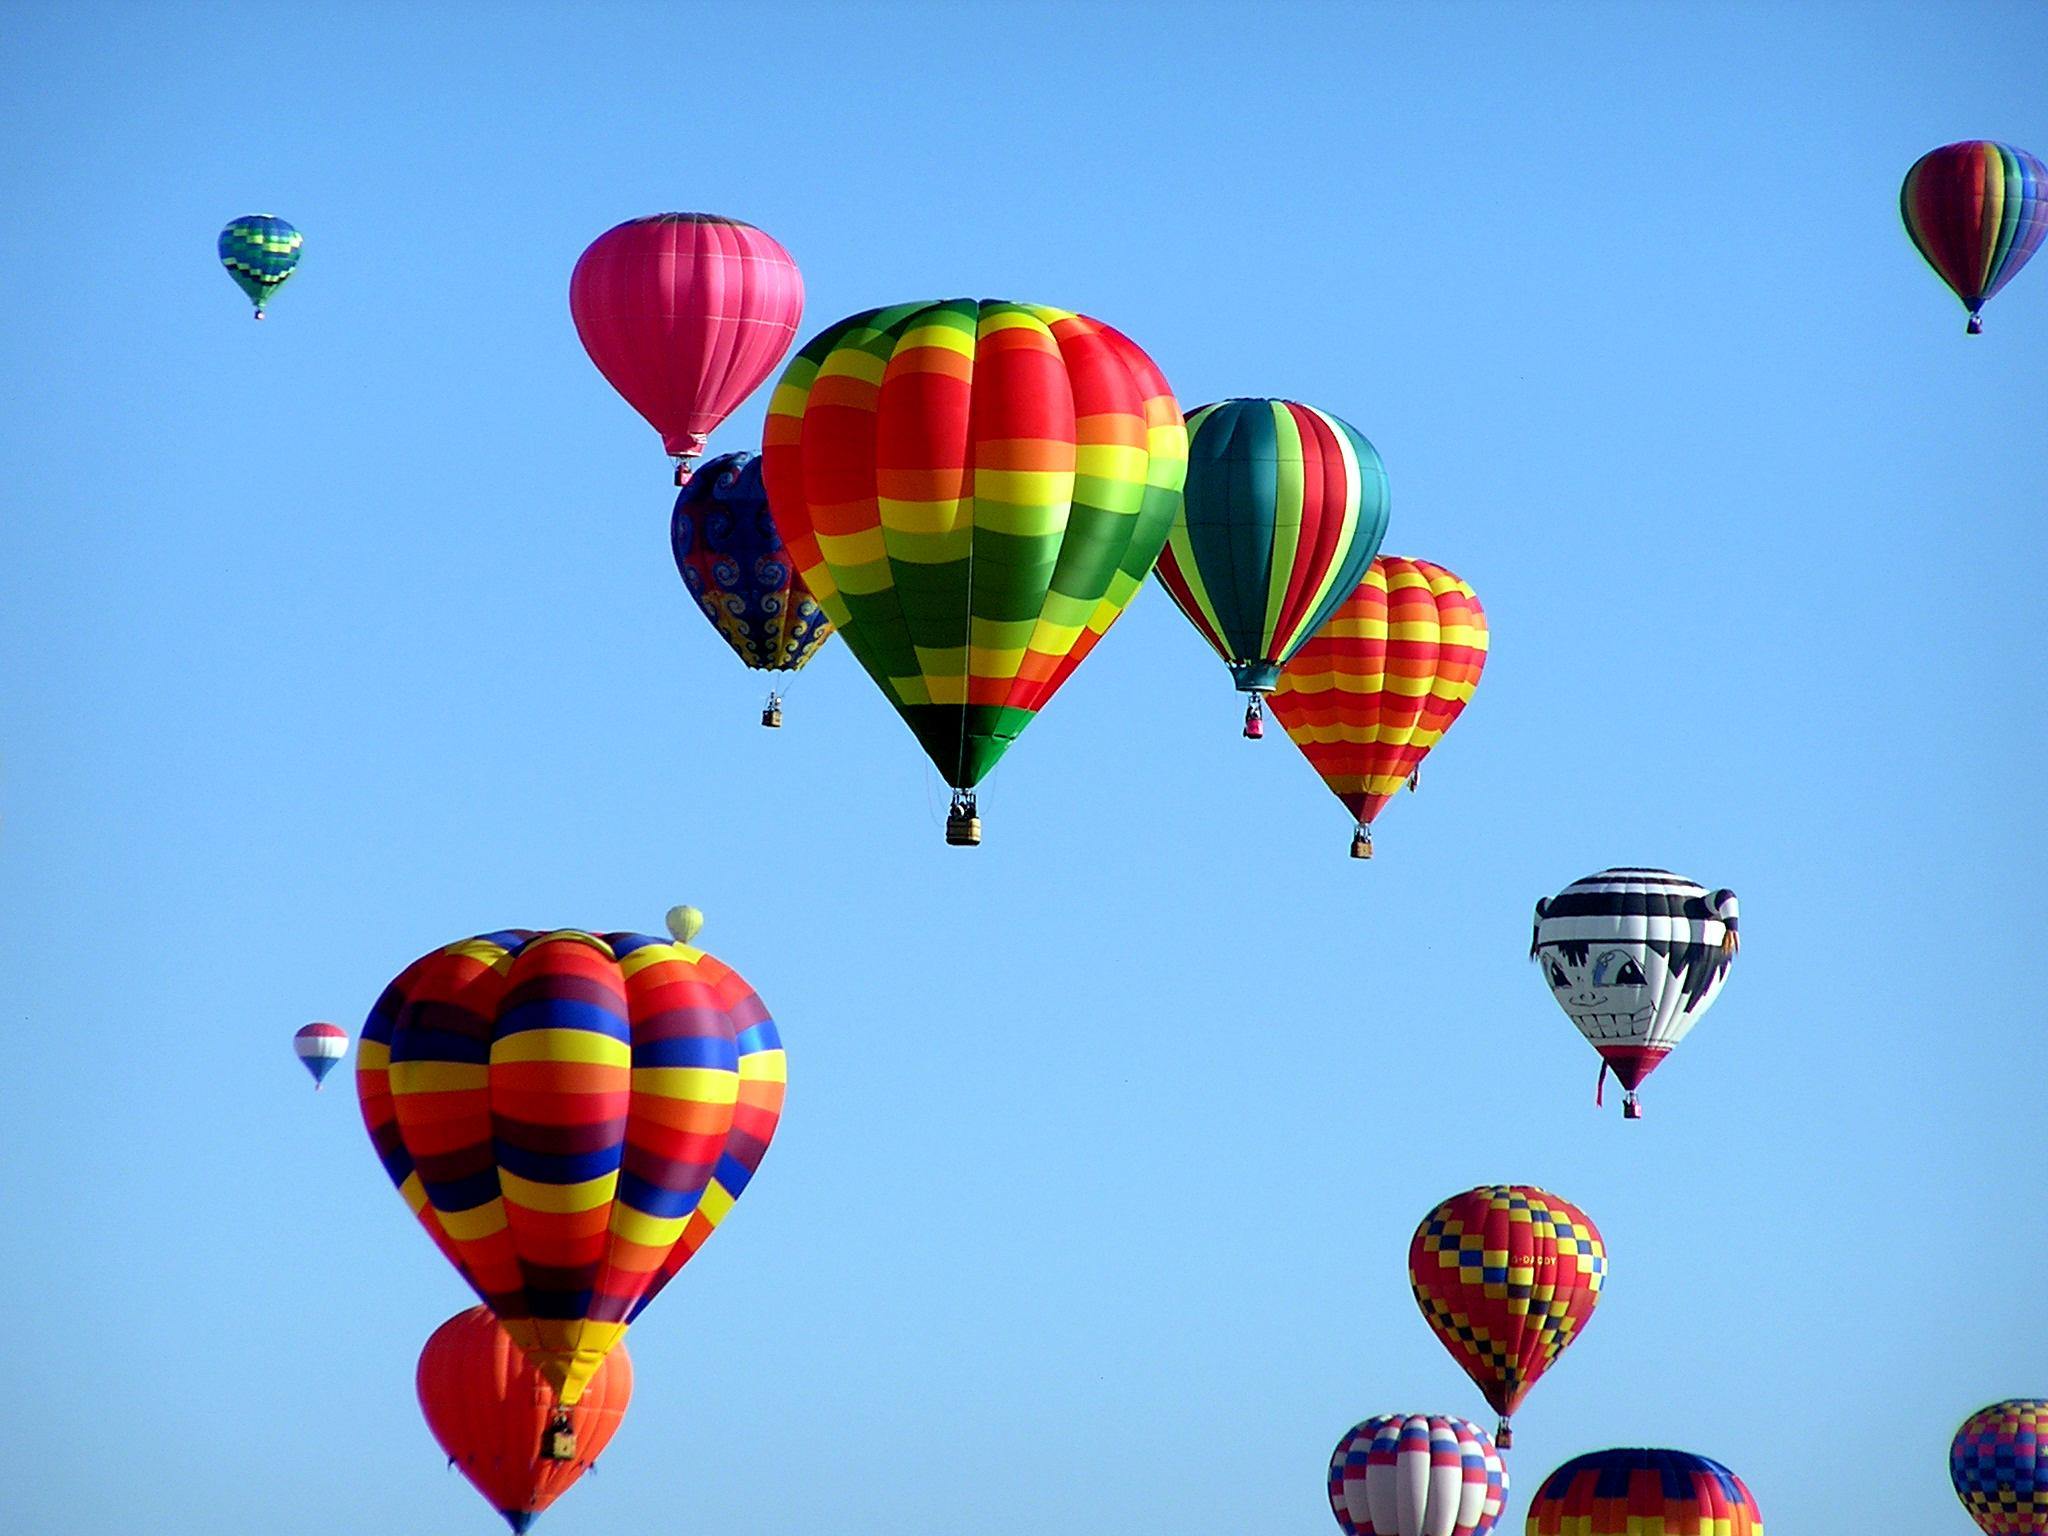 There's nothing quite like watching hot-air balloons float into the air.